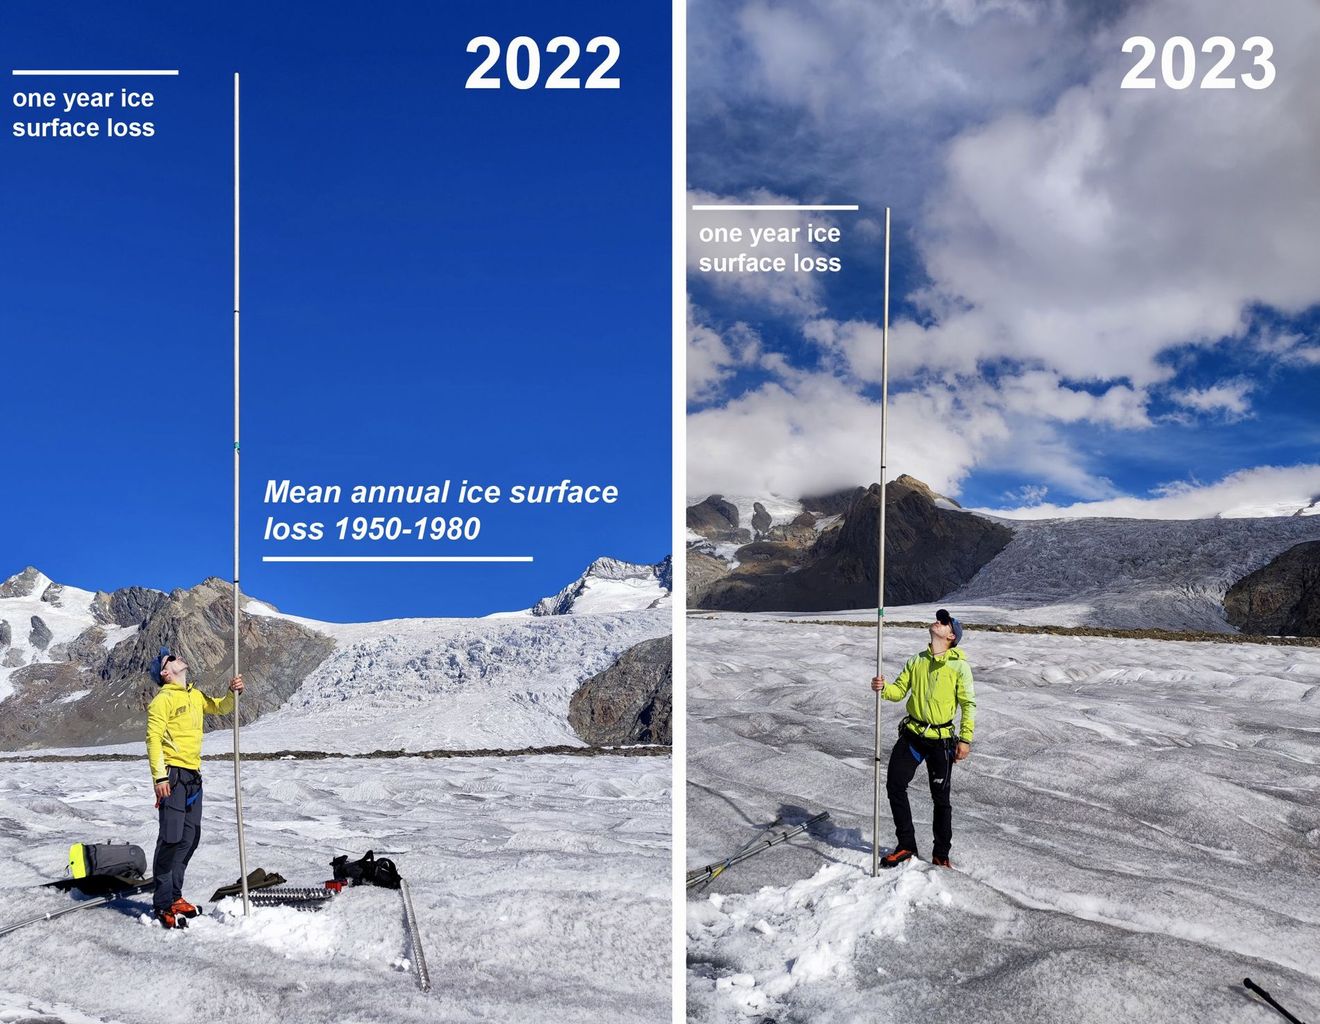 4.7 metres of ice melted in 2023 (right) at the Concordia Place (Konkordiaplatz) on the Great Aletsch Glacier. The level in 2022 (left) was 6.3 metres, and averaged 2.5 metres between 1950 and 1980.